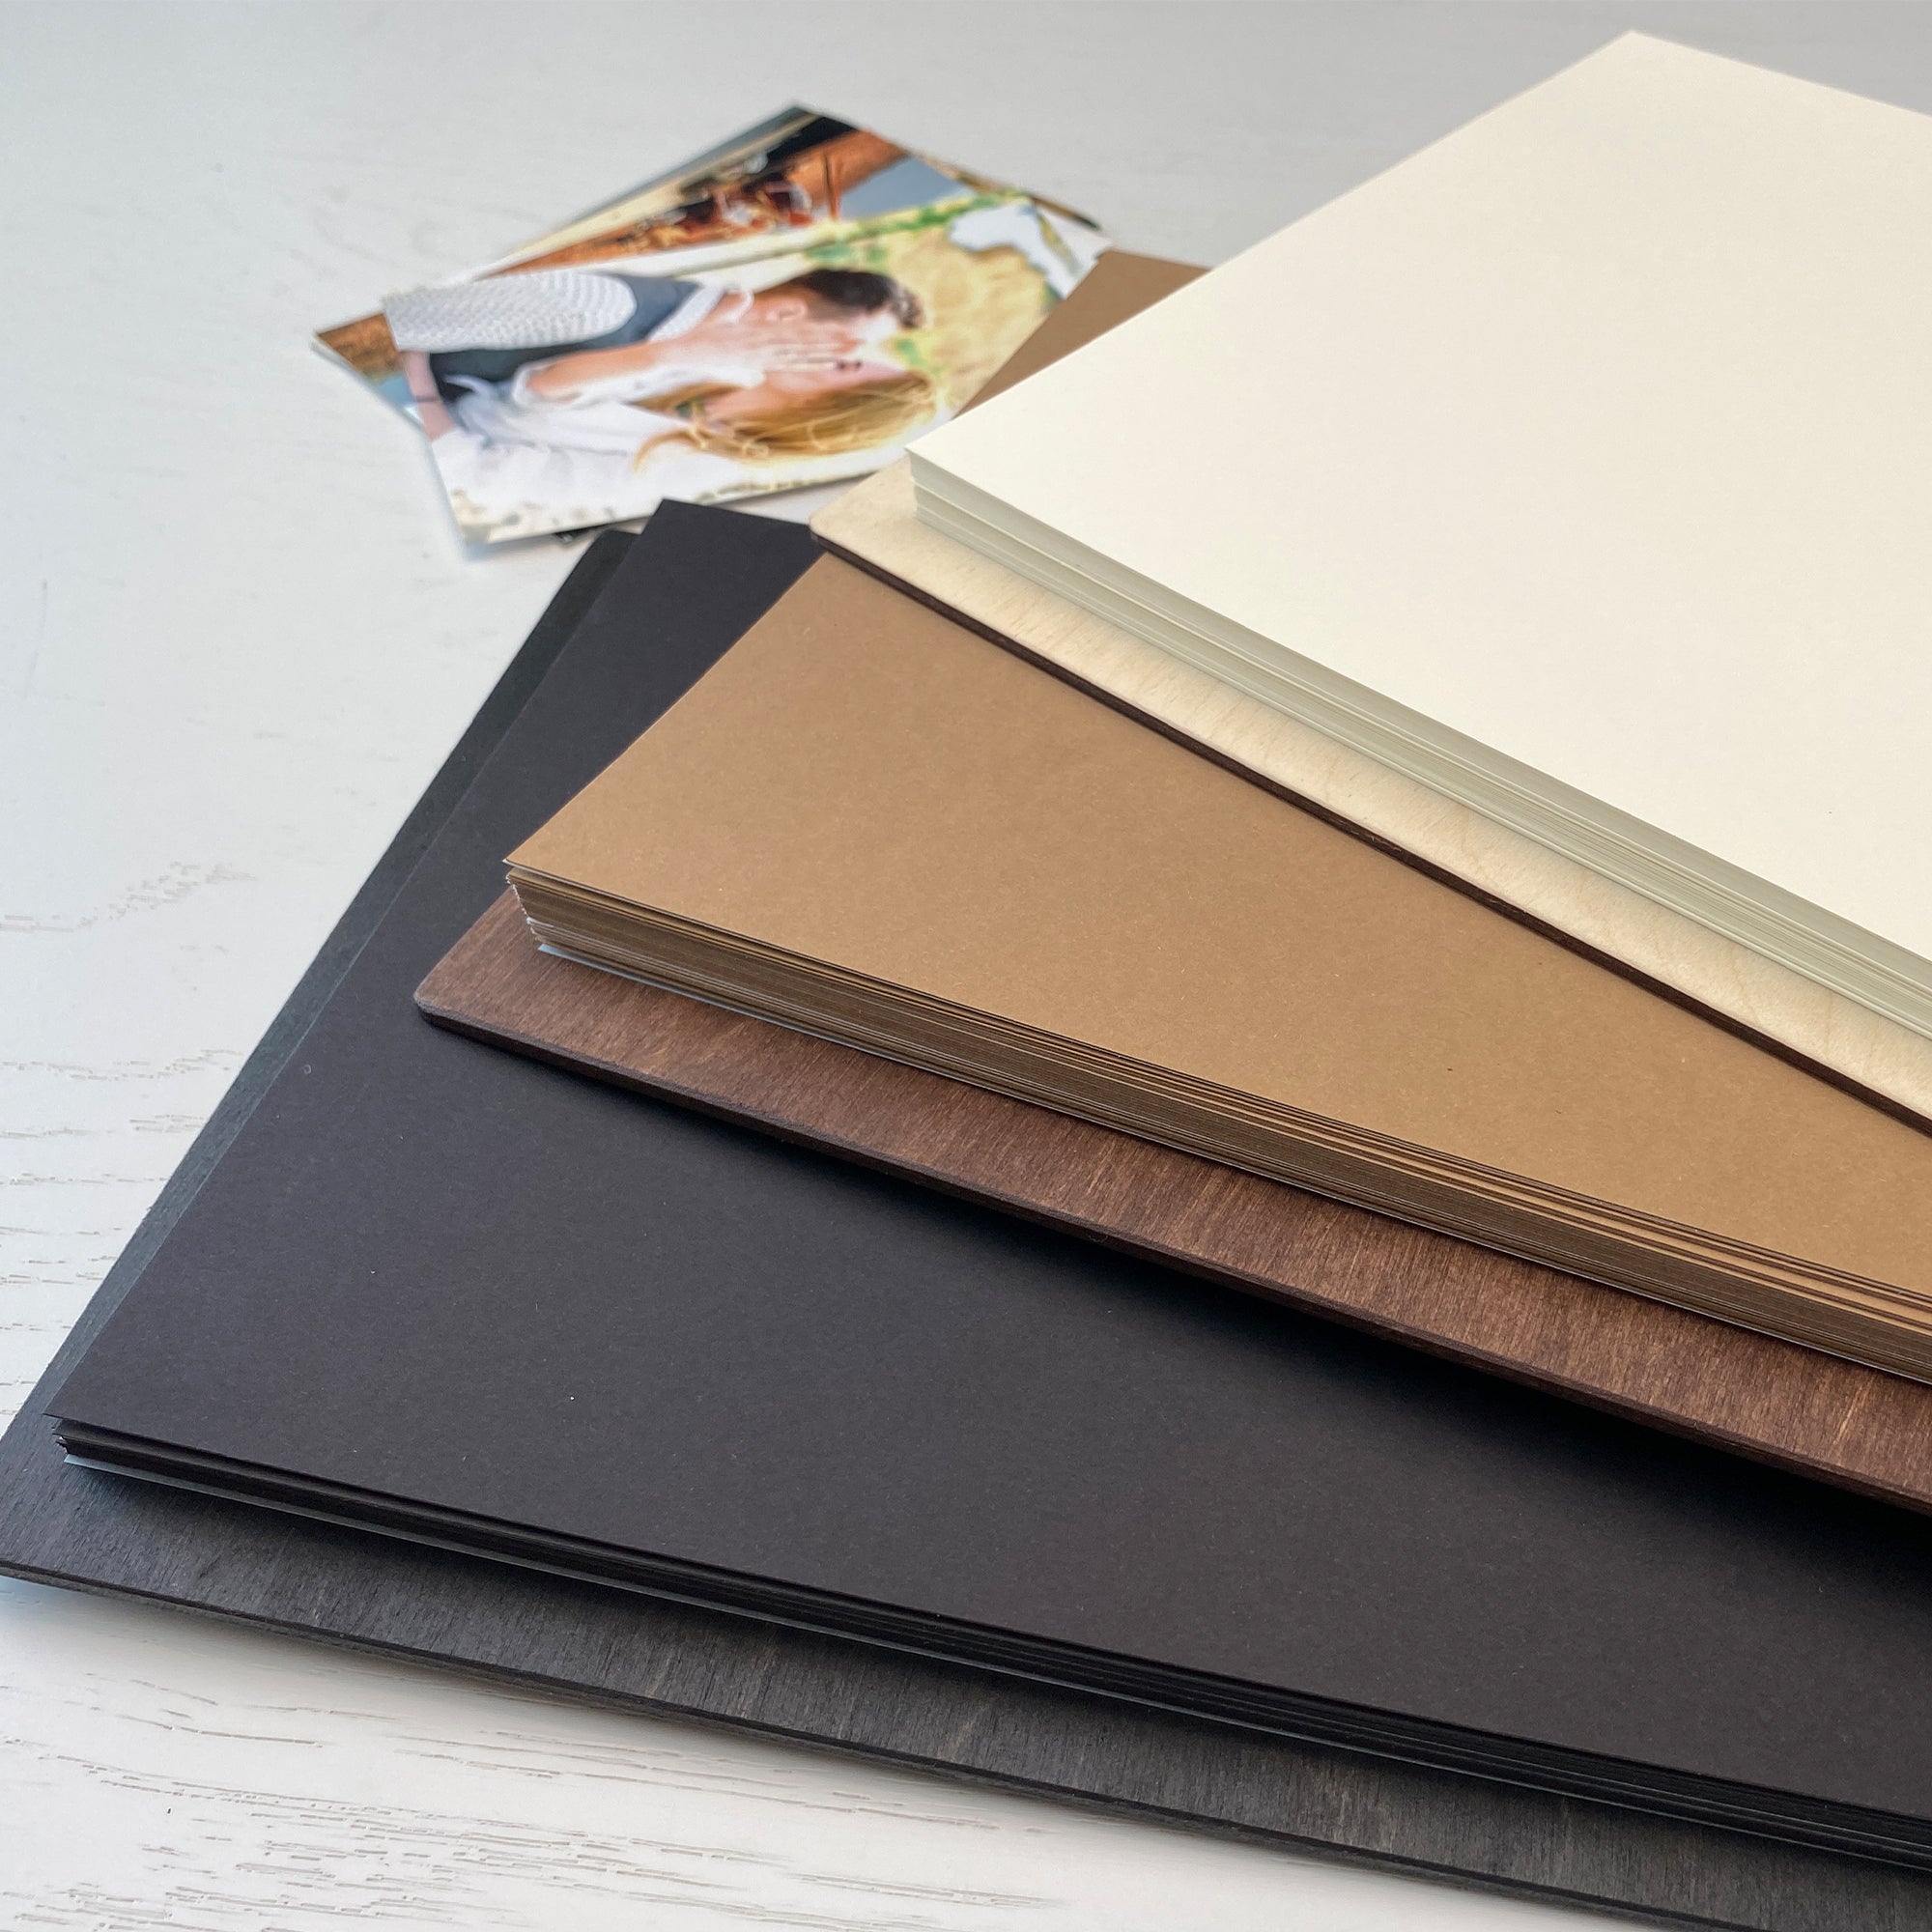 Personalized photo album with leather cover and Mountains engraving